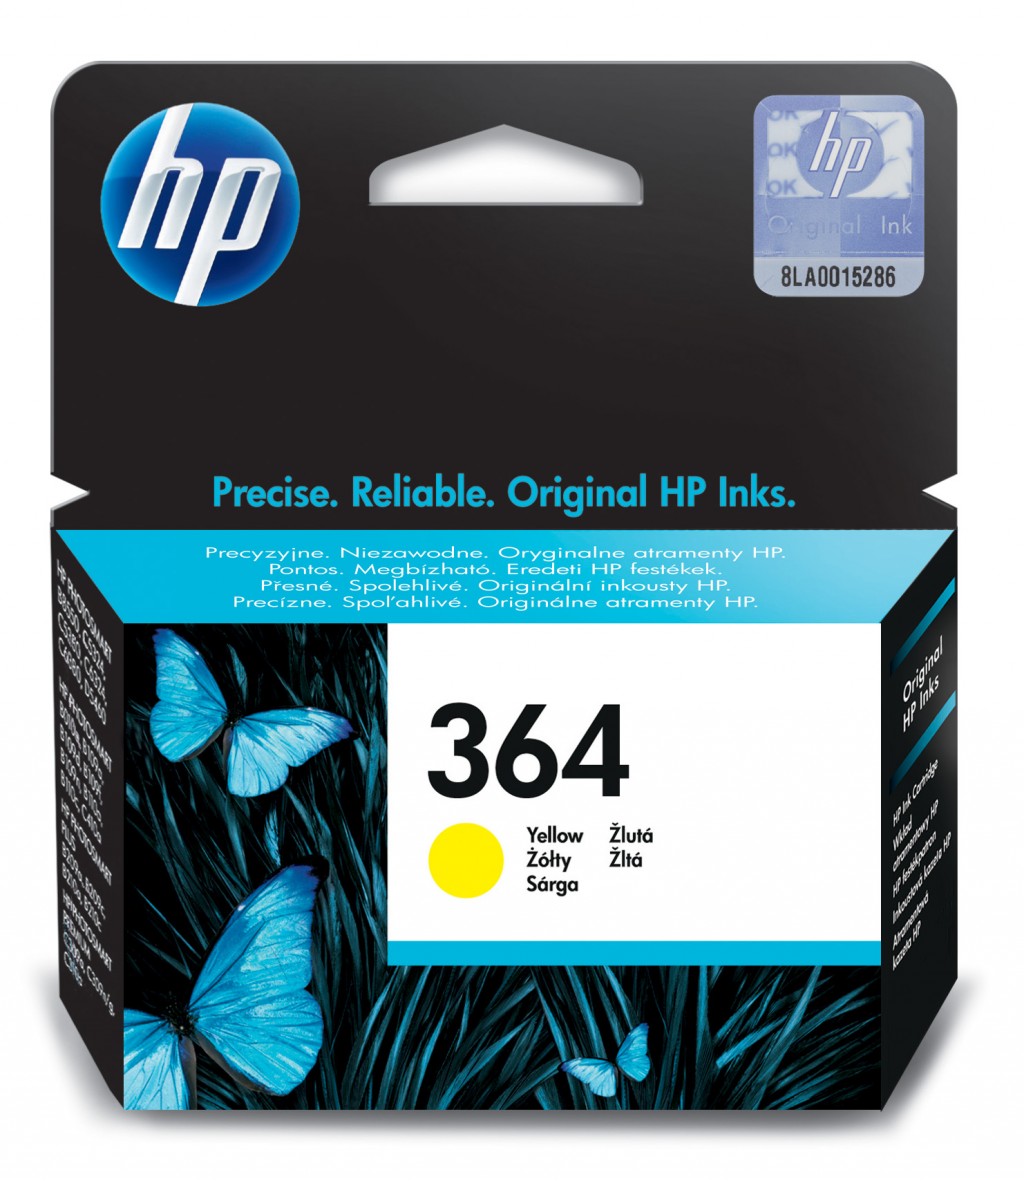 HP 364 ink yellow Vivera blister